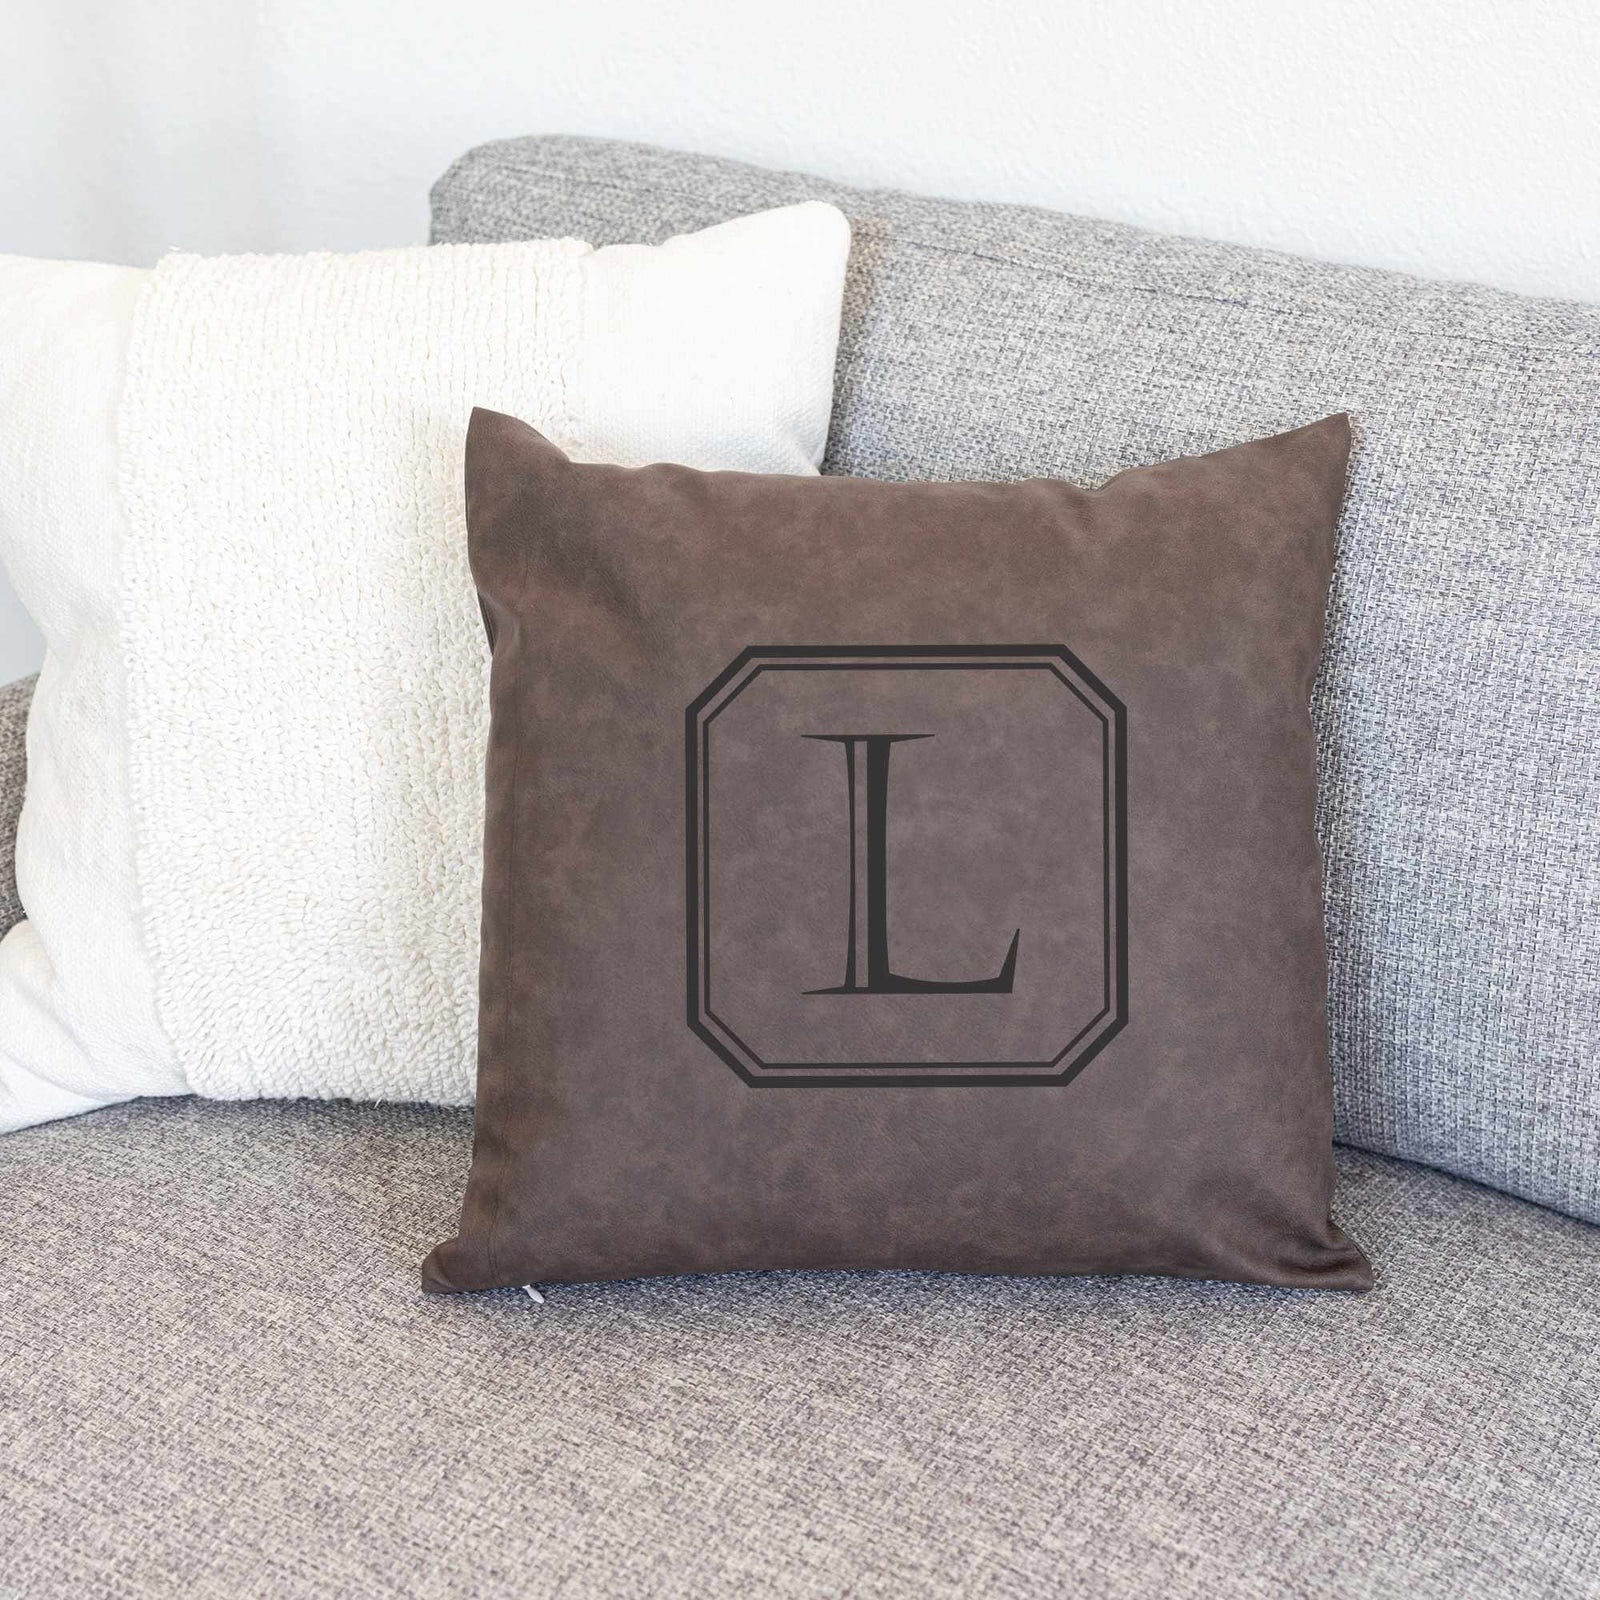 Classic Vegan Leather Pillow Cover with Initial